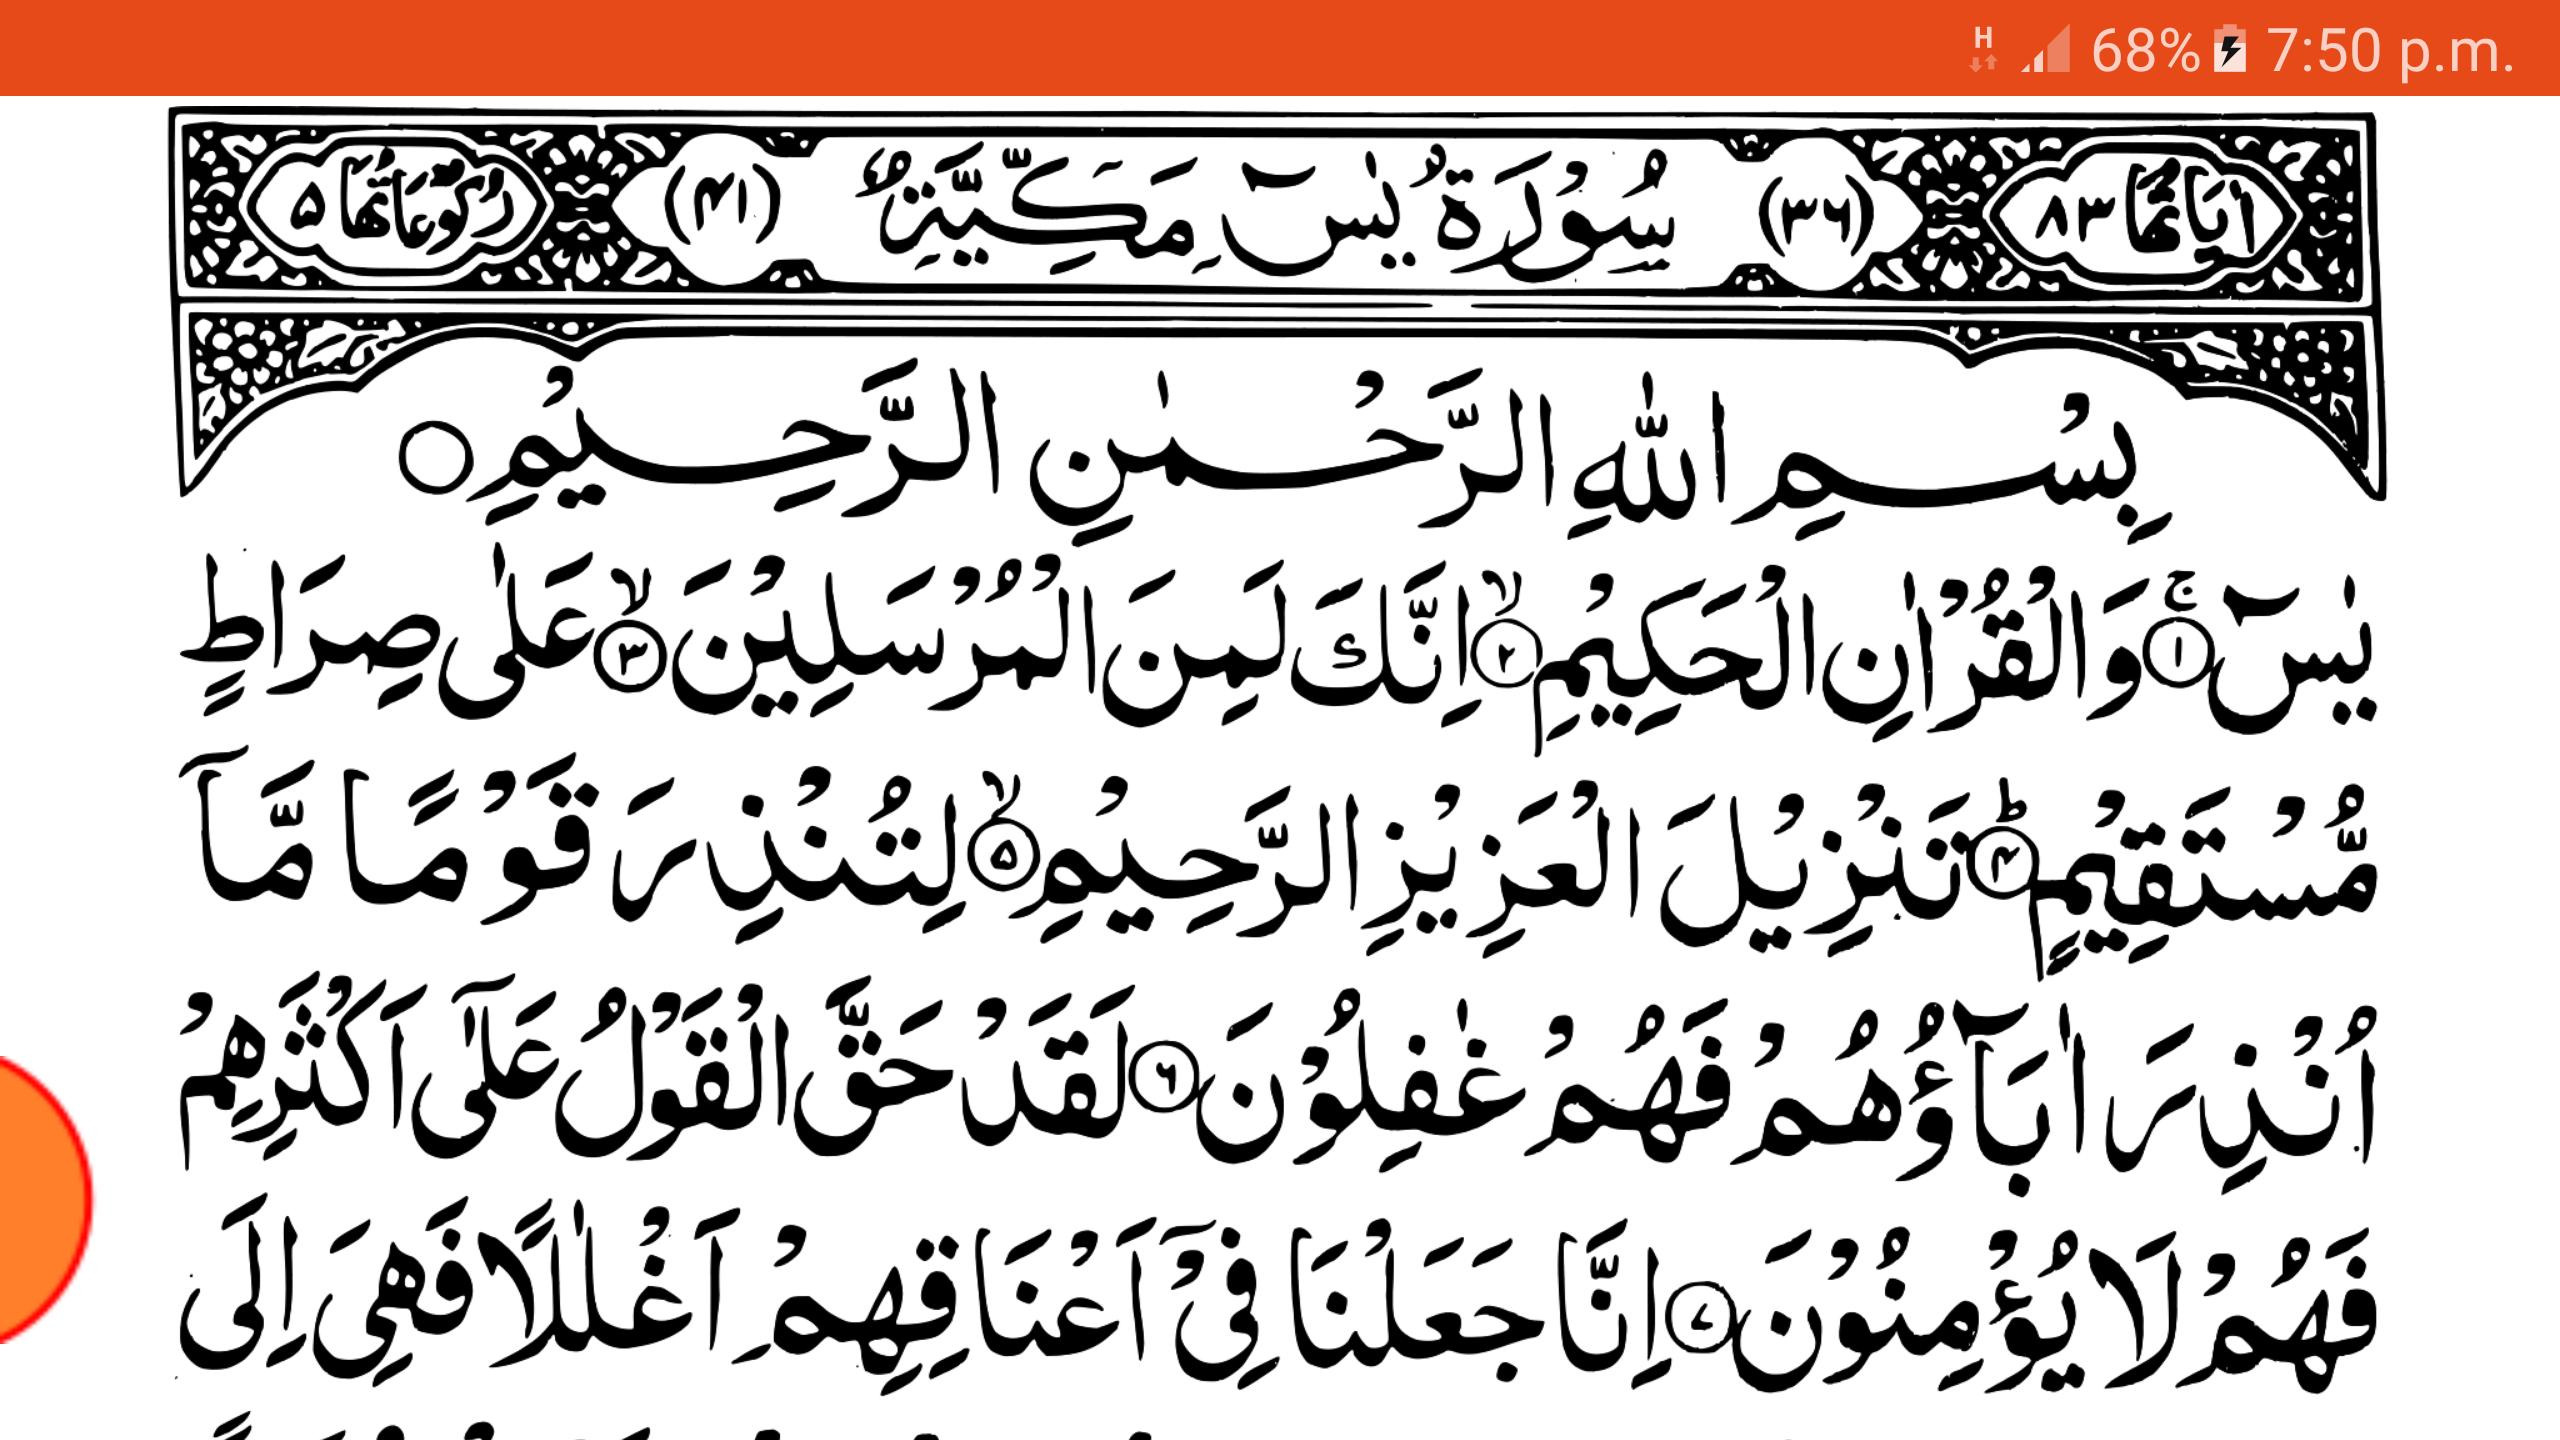 Surah Yasin for Android - APK Download